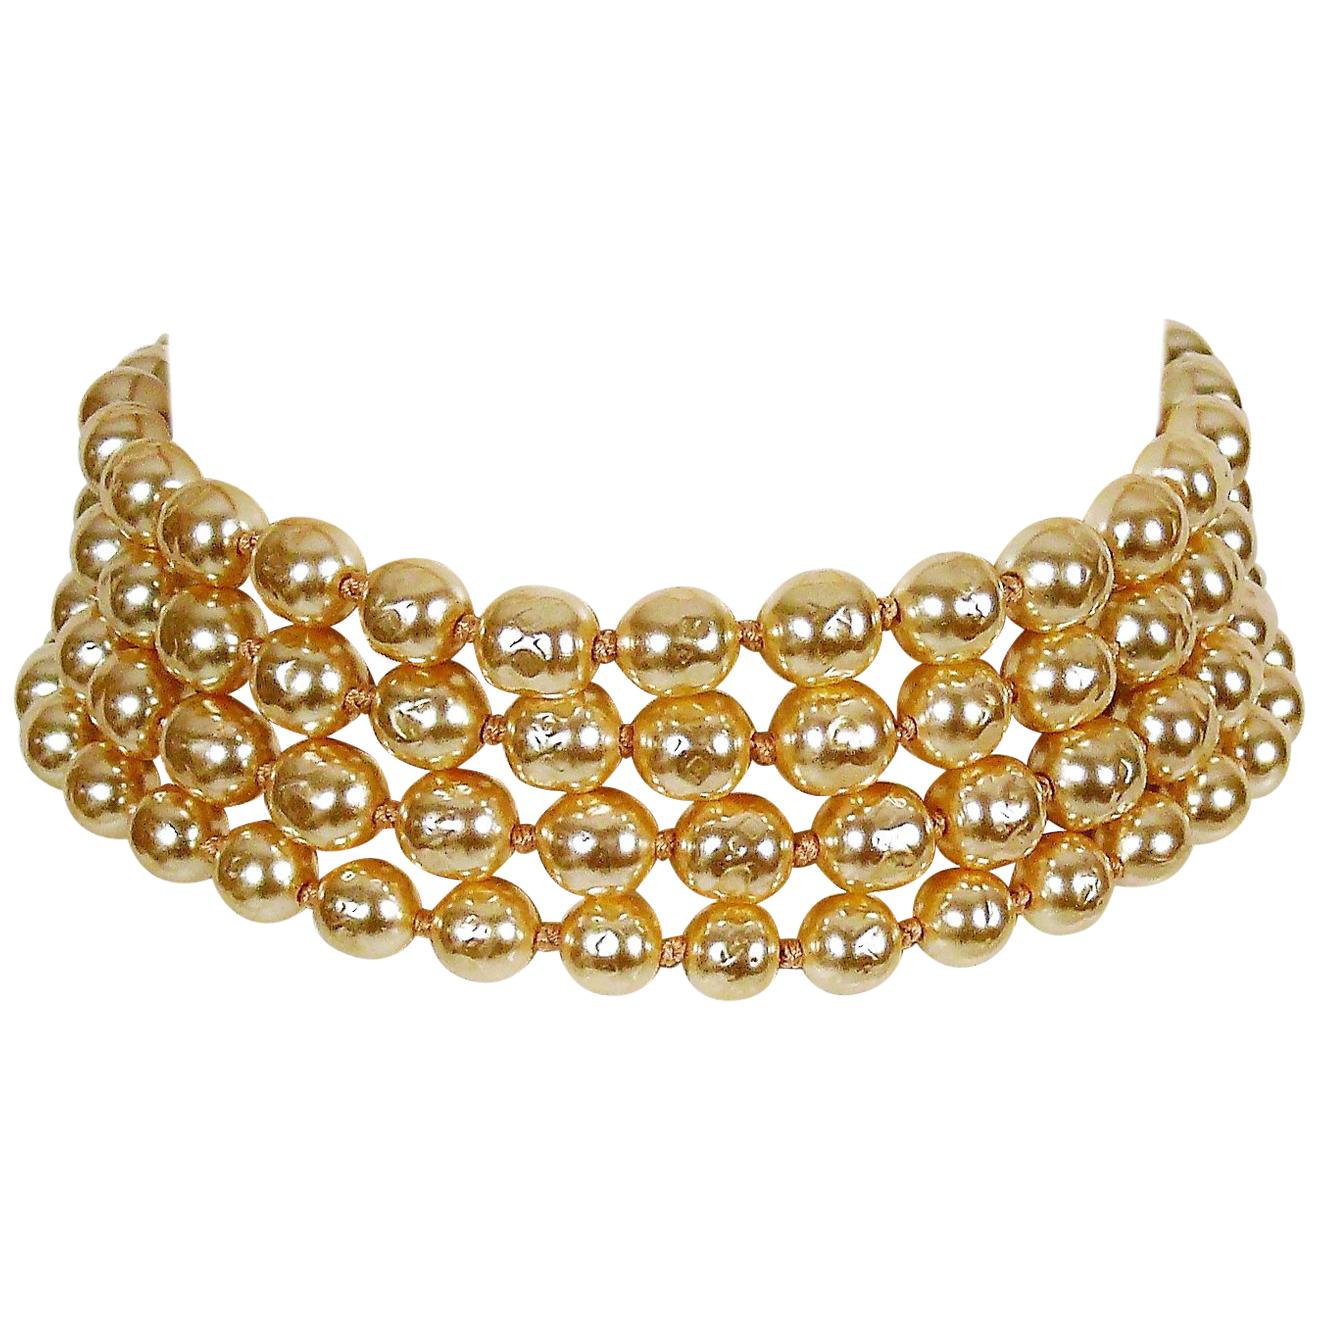 Karl Lagerfeld Vintage Multi Layer Pearl Choker Necklace